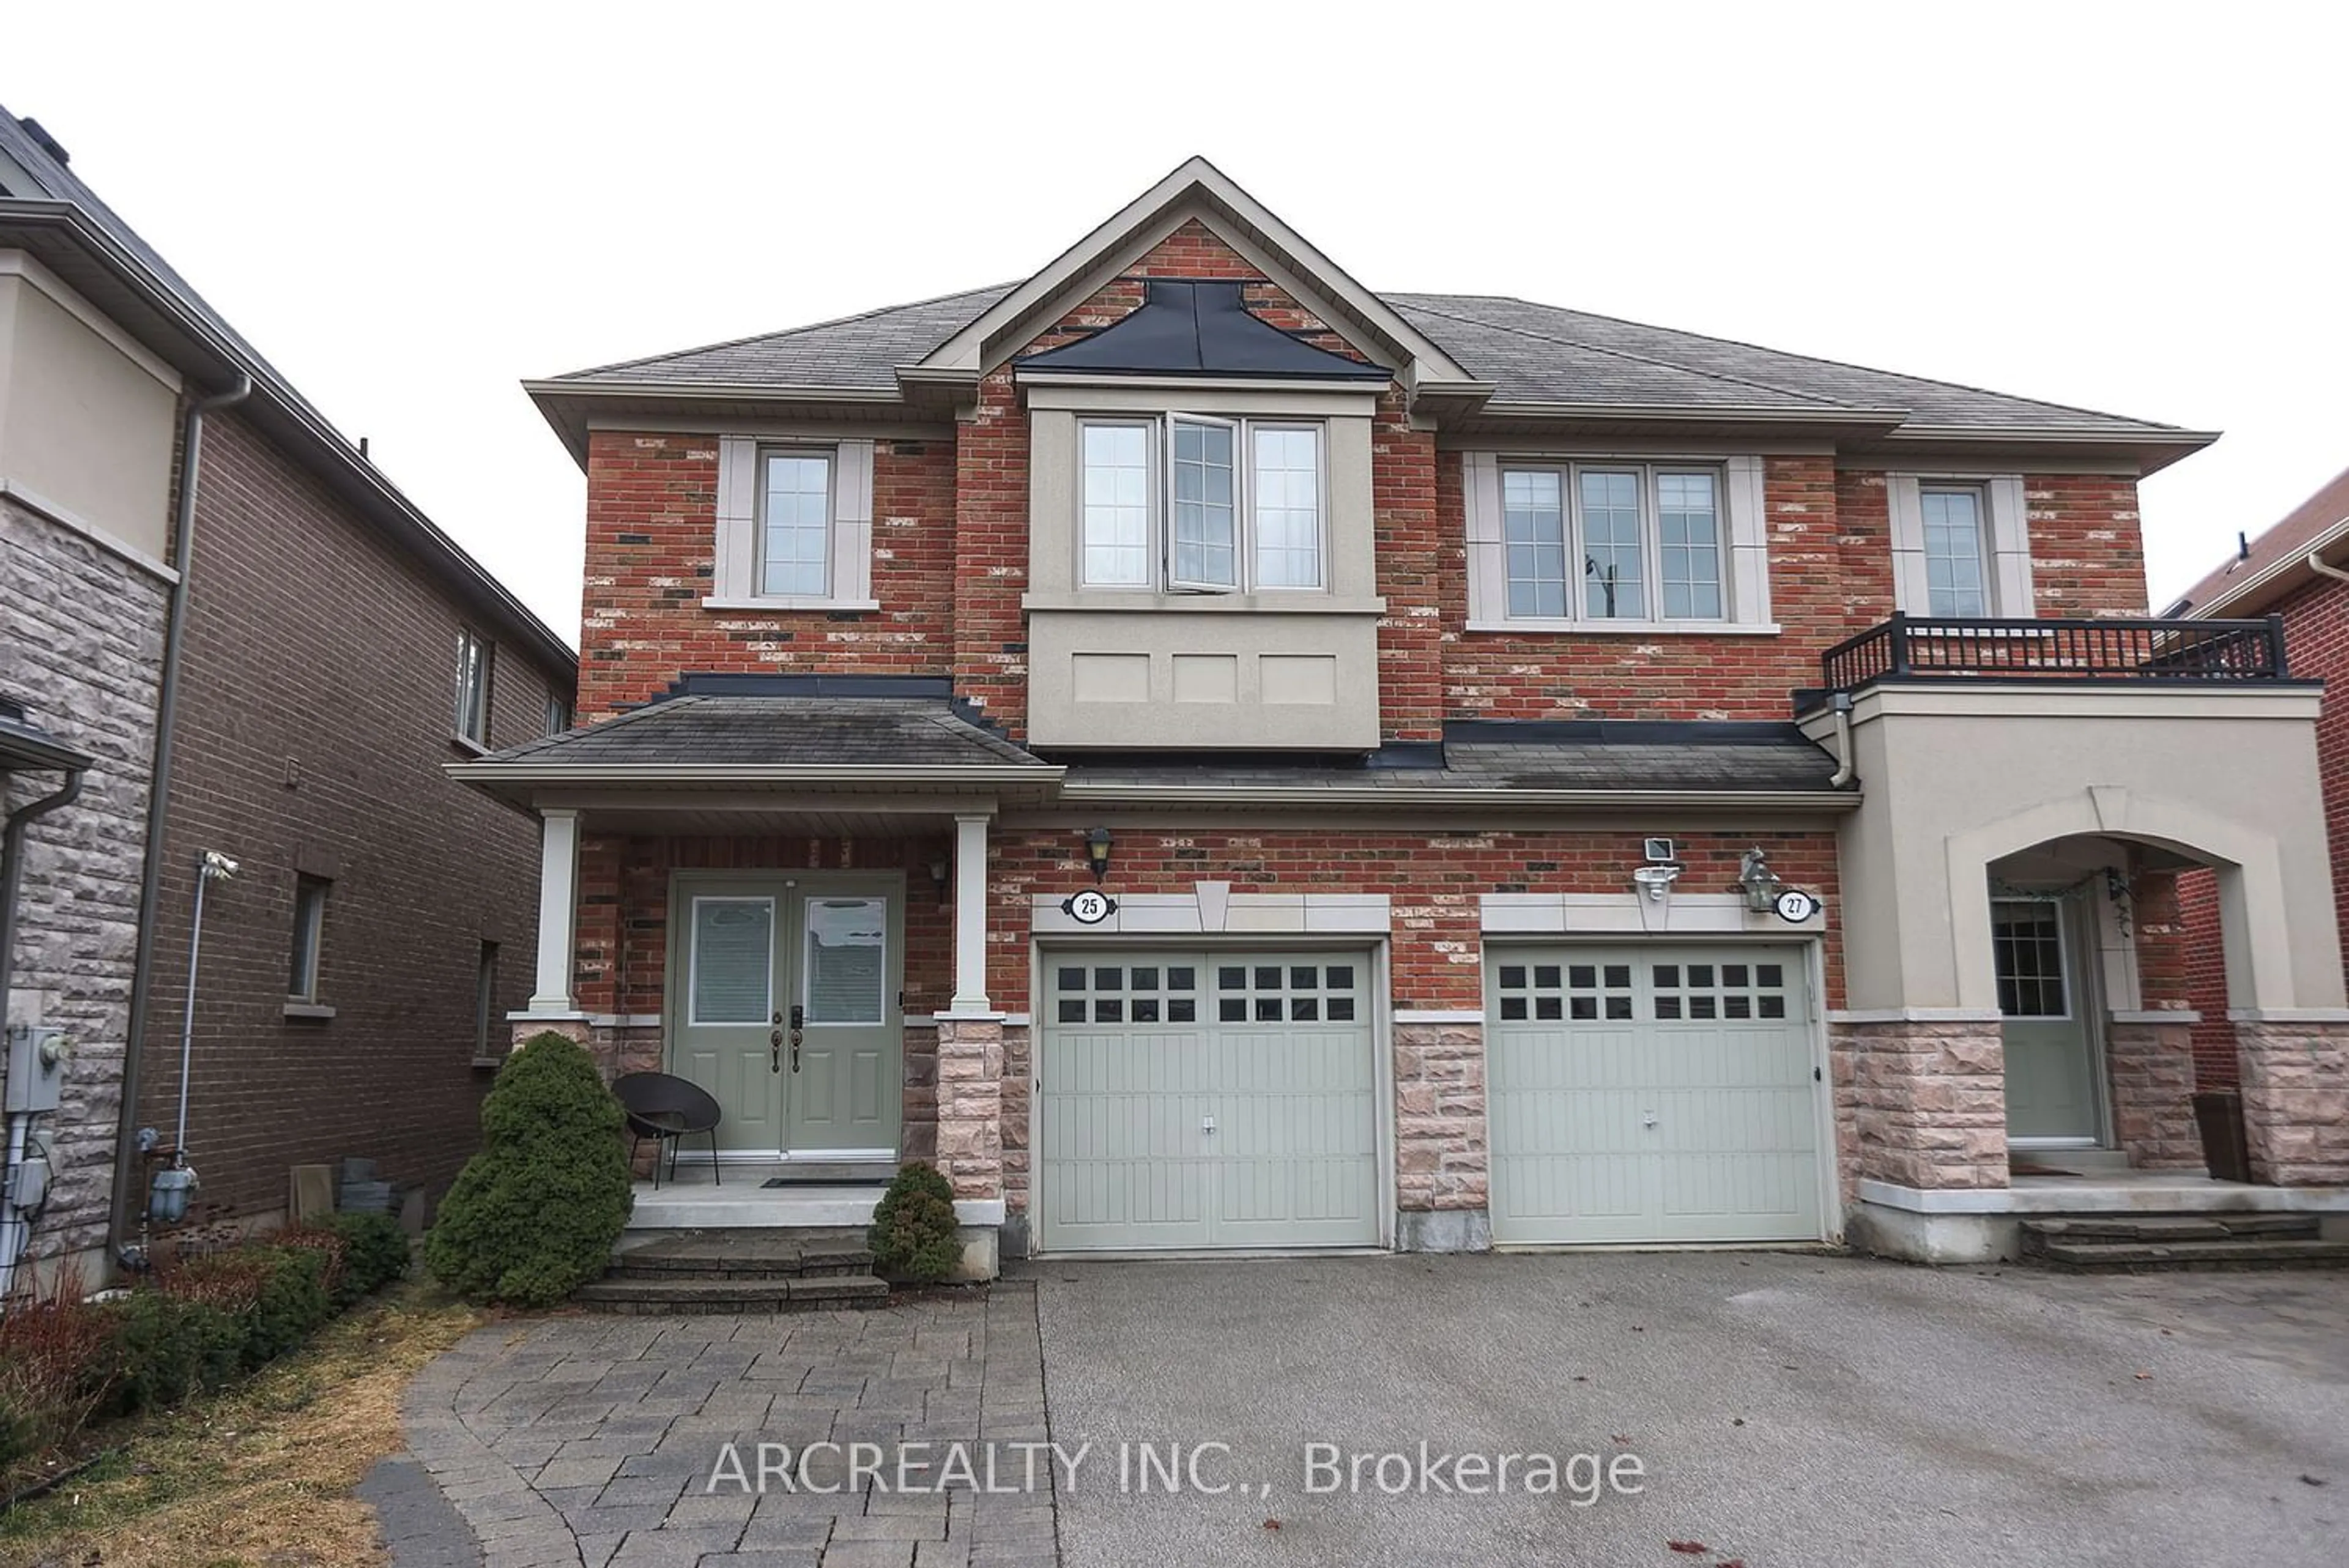 Home with brick exterior material for 25 Shallot Crt, Richmond Hill Ontario L4S 0C1